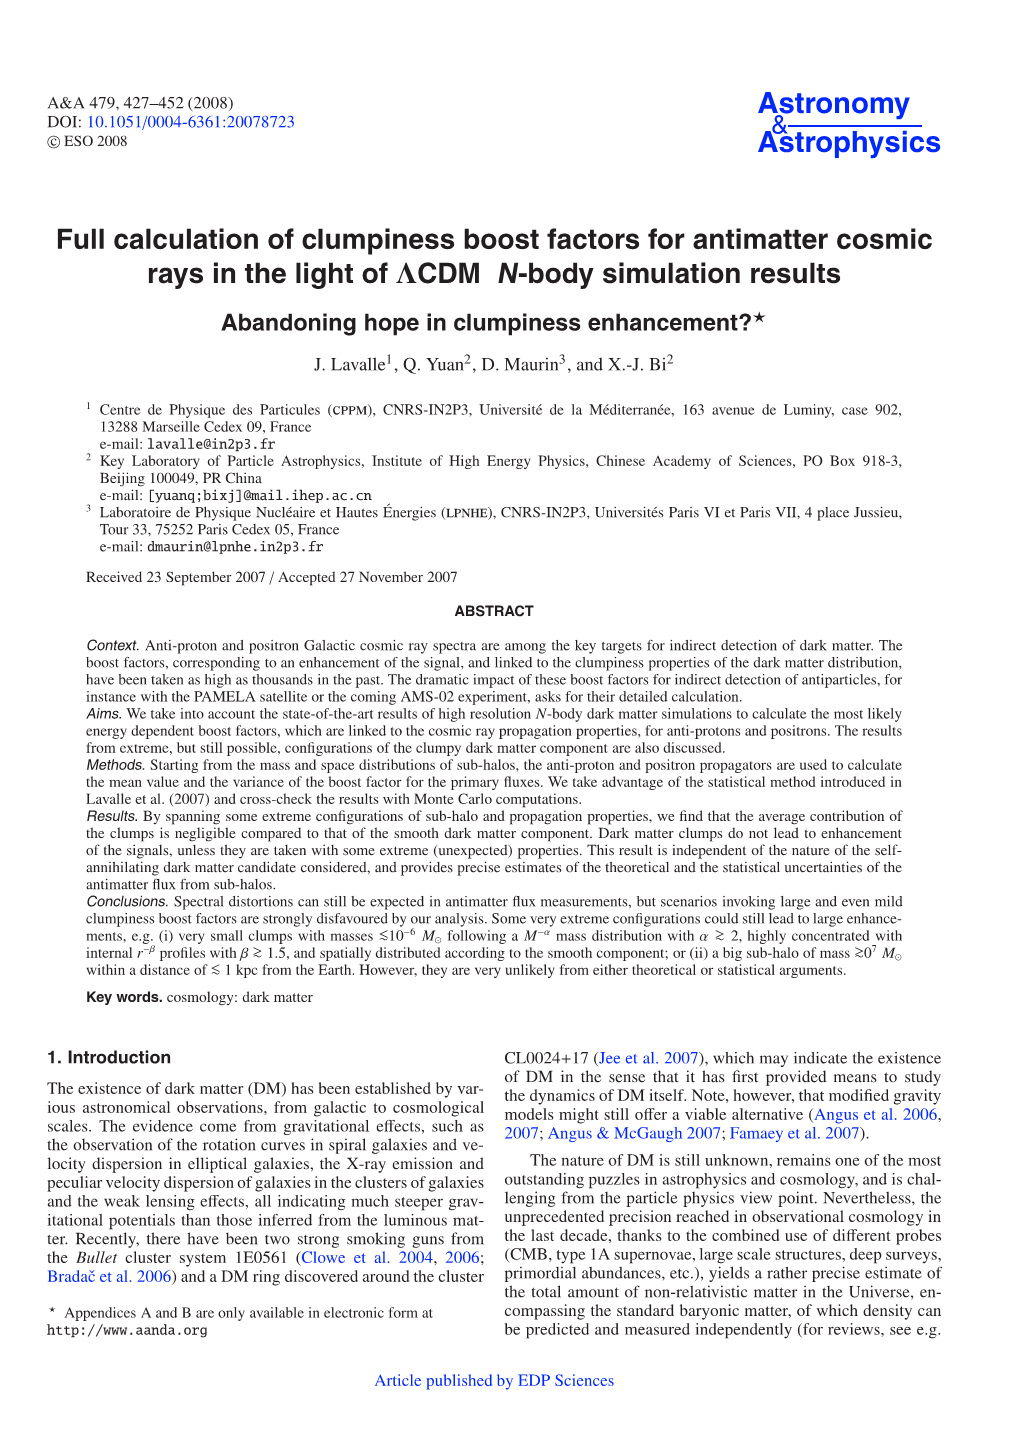 Full Calculation of Clumpiness Boost Factors for Antimatter Cosmic Rays in the Light of ΛCDM N-Body Simulation Results Abandoning Hope in Clumpiness Enhancement?